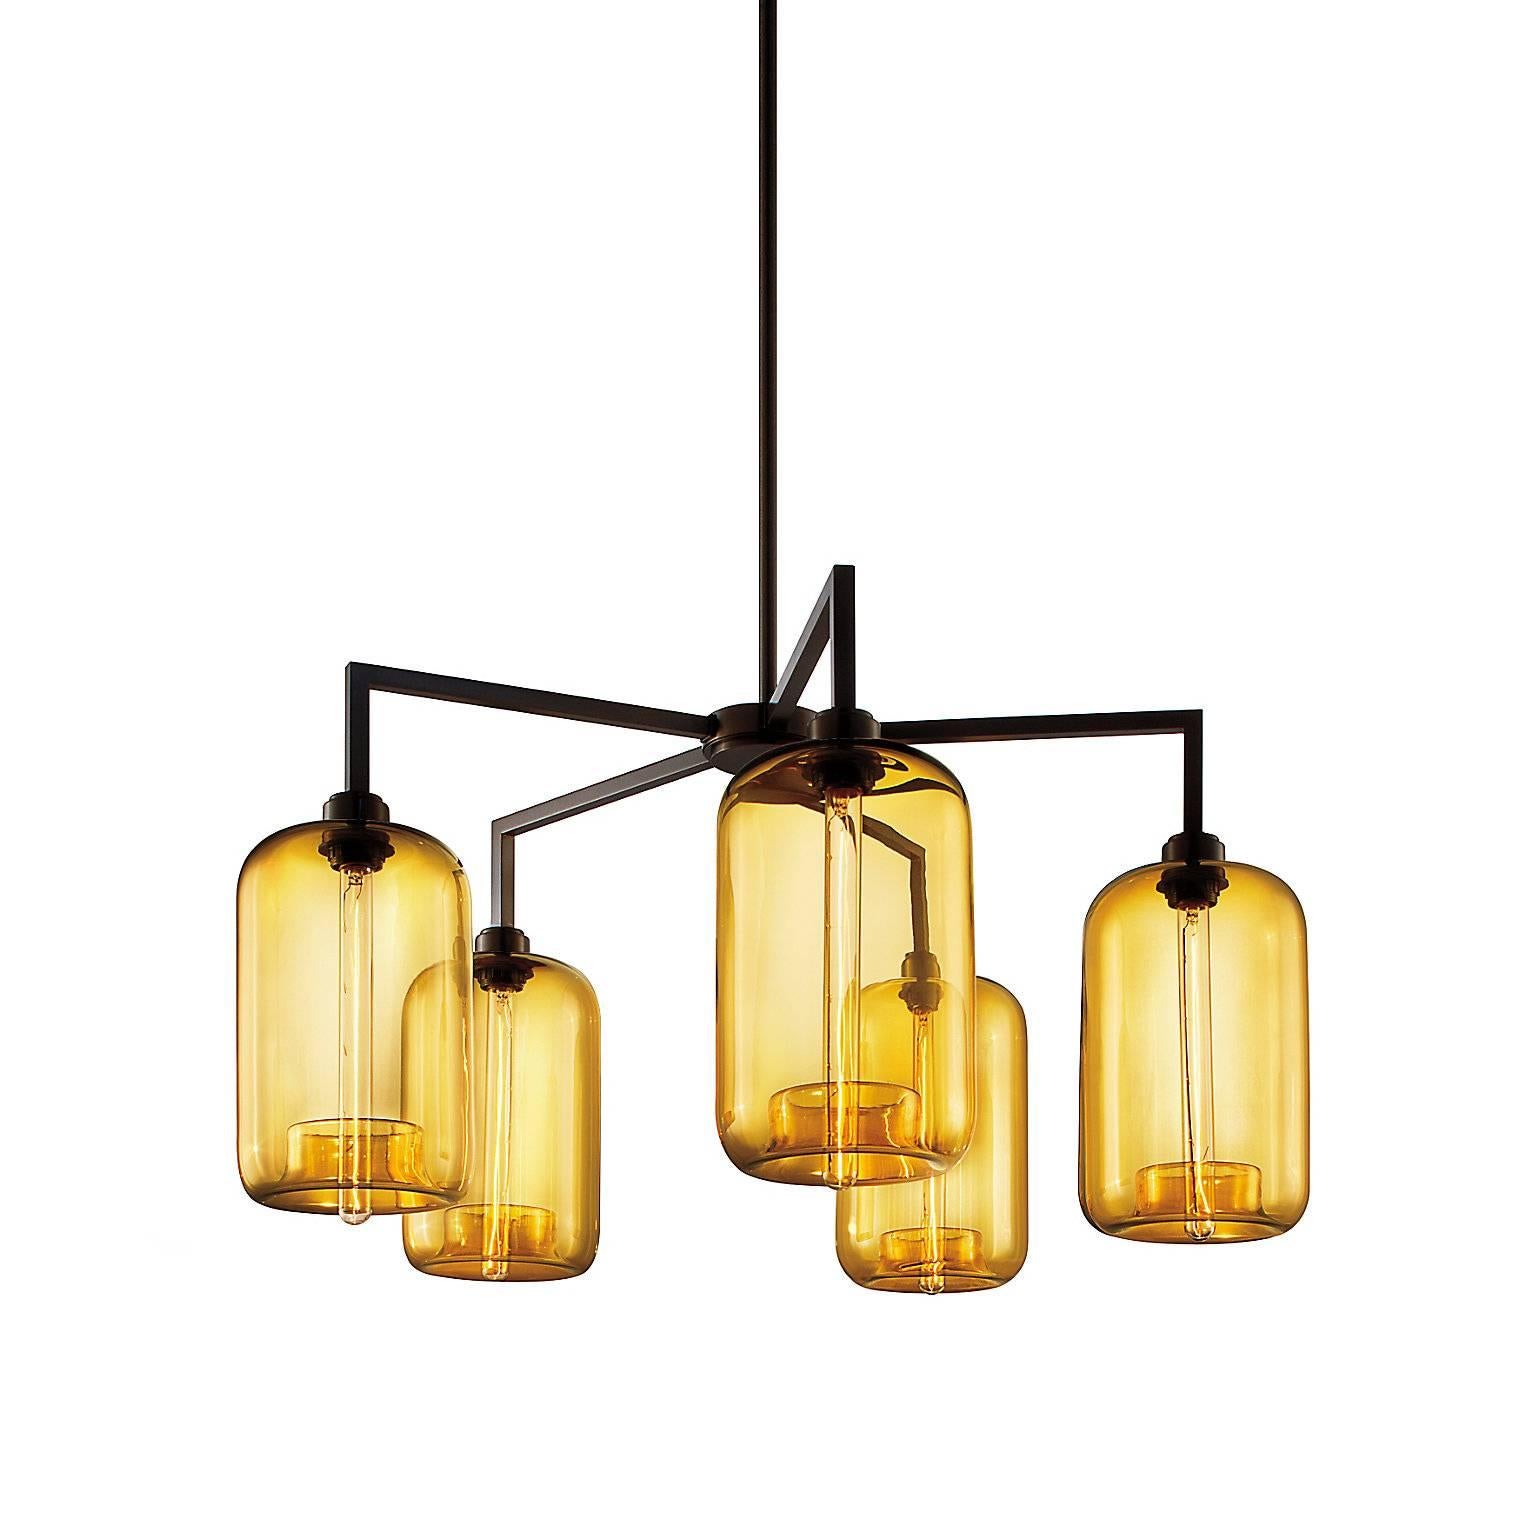 The refined frame of the quill chandelier accentuates the handcrafted silhouettes suspended from its bold body. With several signature glass and metal finish options available, the wide range of configurations offered in this collection enables the